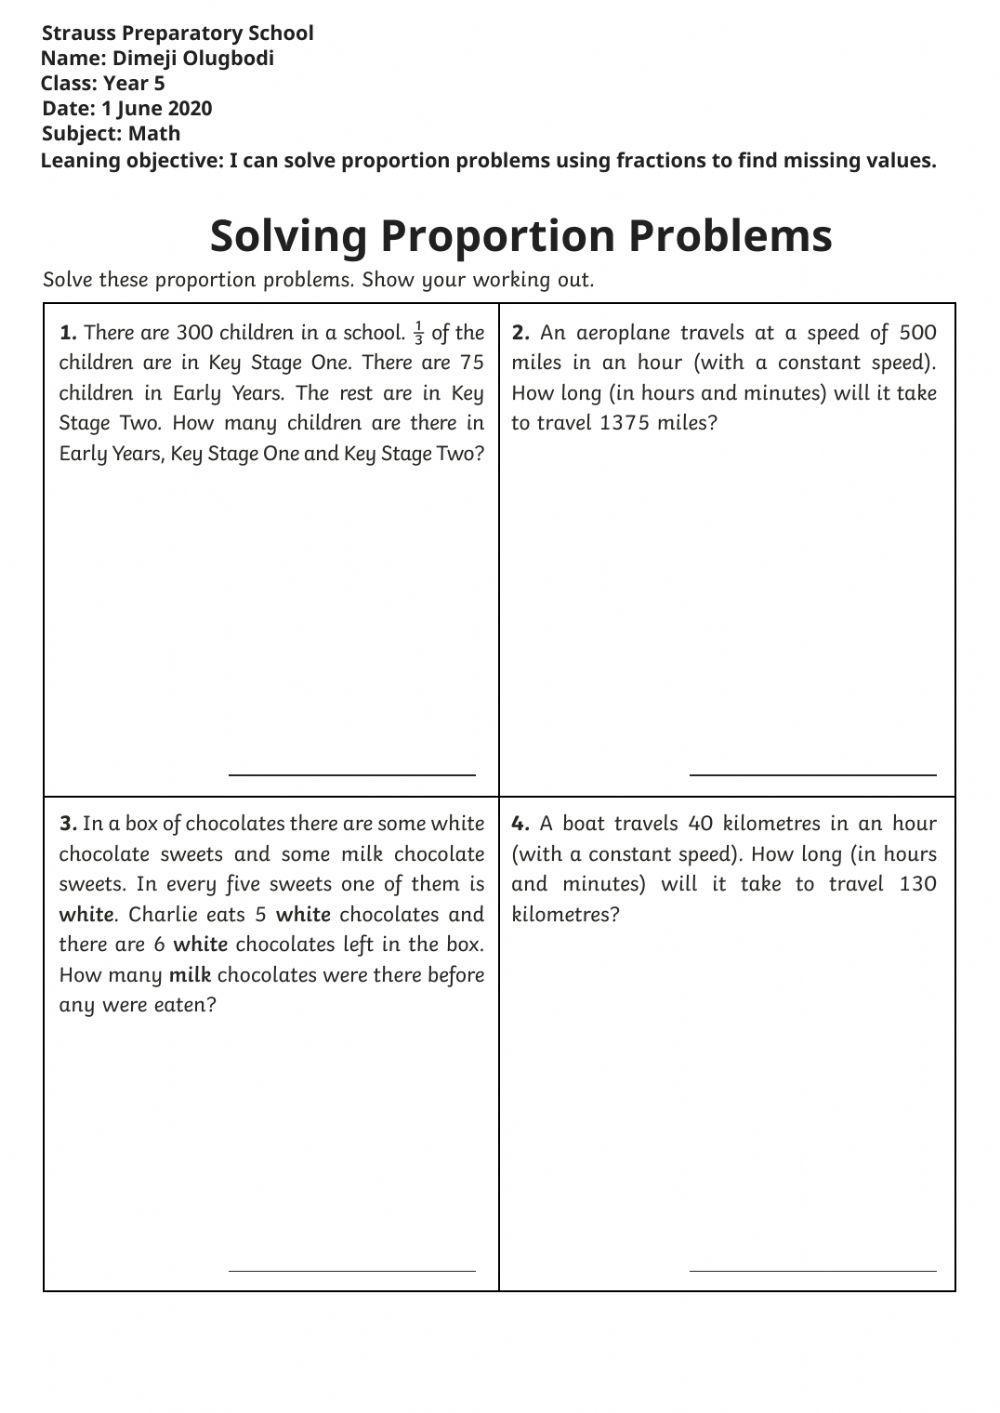 Solving Proportion Problems